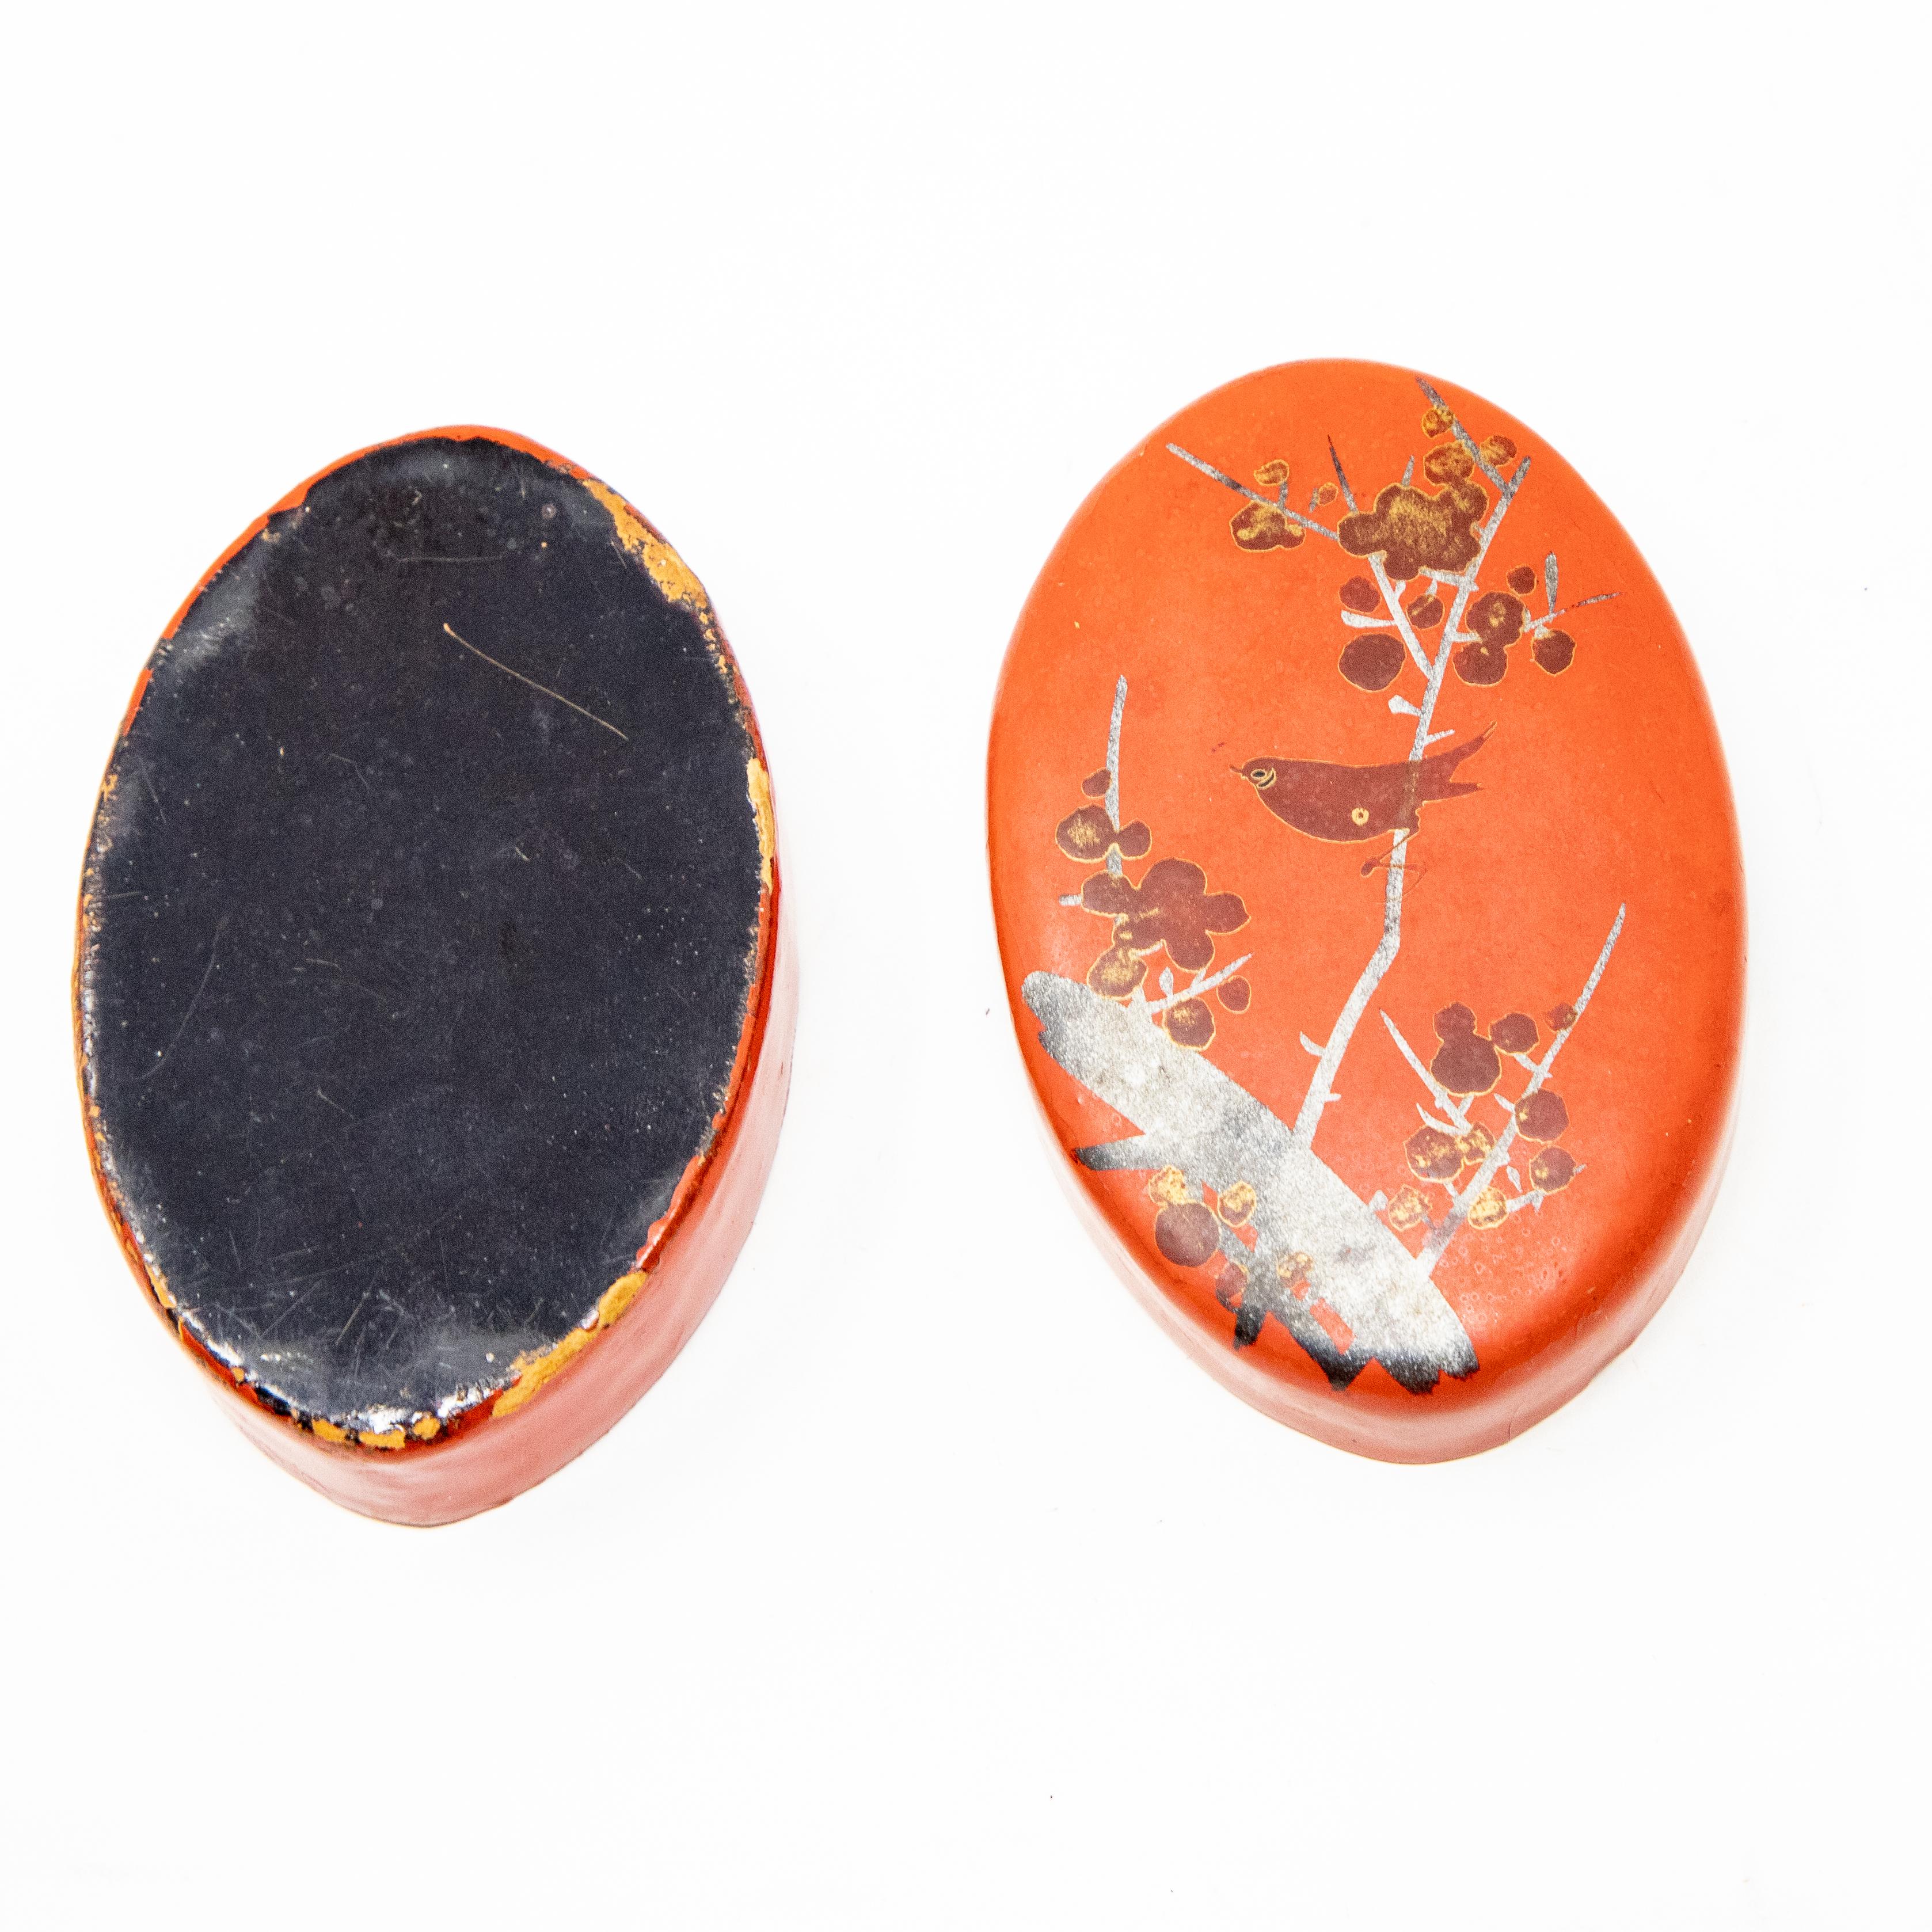 Offering this gorgeous red lacquer paper mâché pillbox. Hand painted in red lacquer with black and gold foliate and bird motif. Opened on the inside is black lacquer, and the bottom is black lacquer as well.